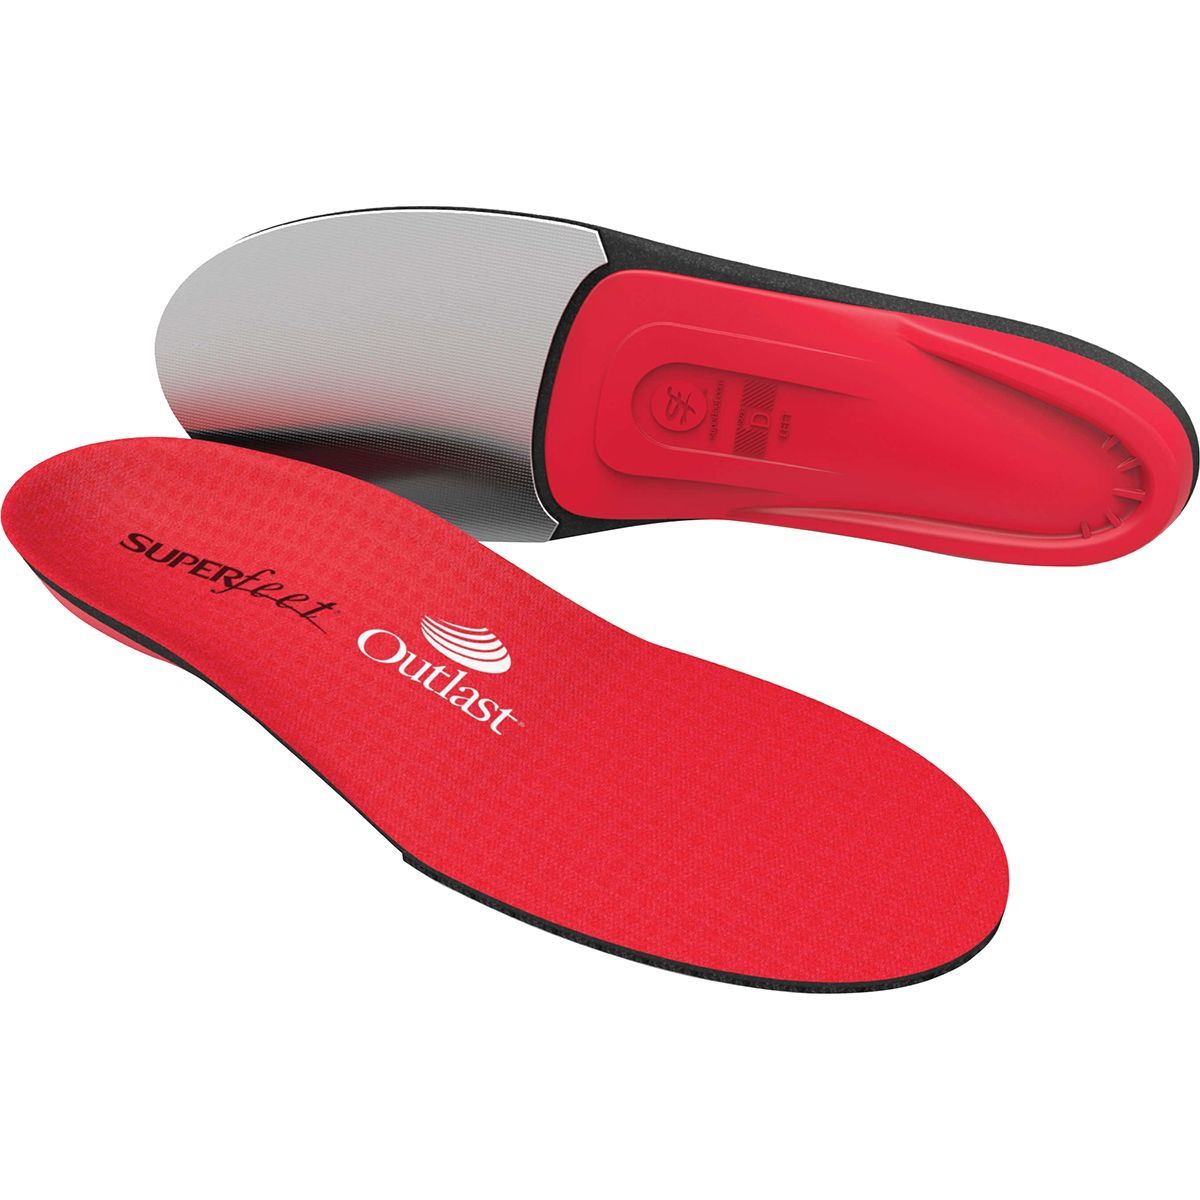 Superfeet REDhot Insole - Men's Red, C, 5.5-7